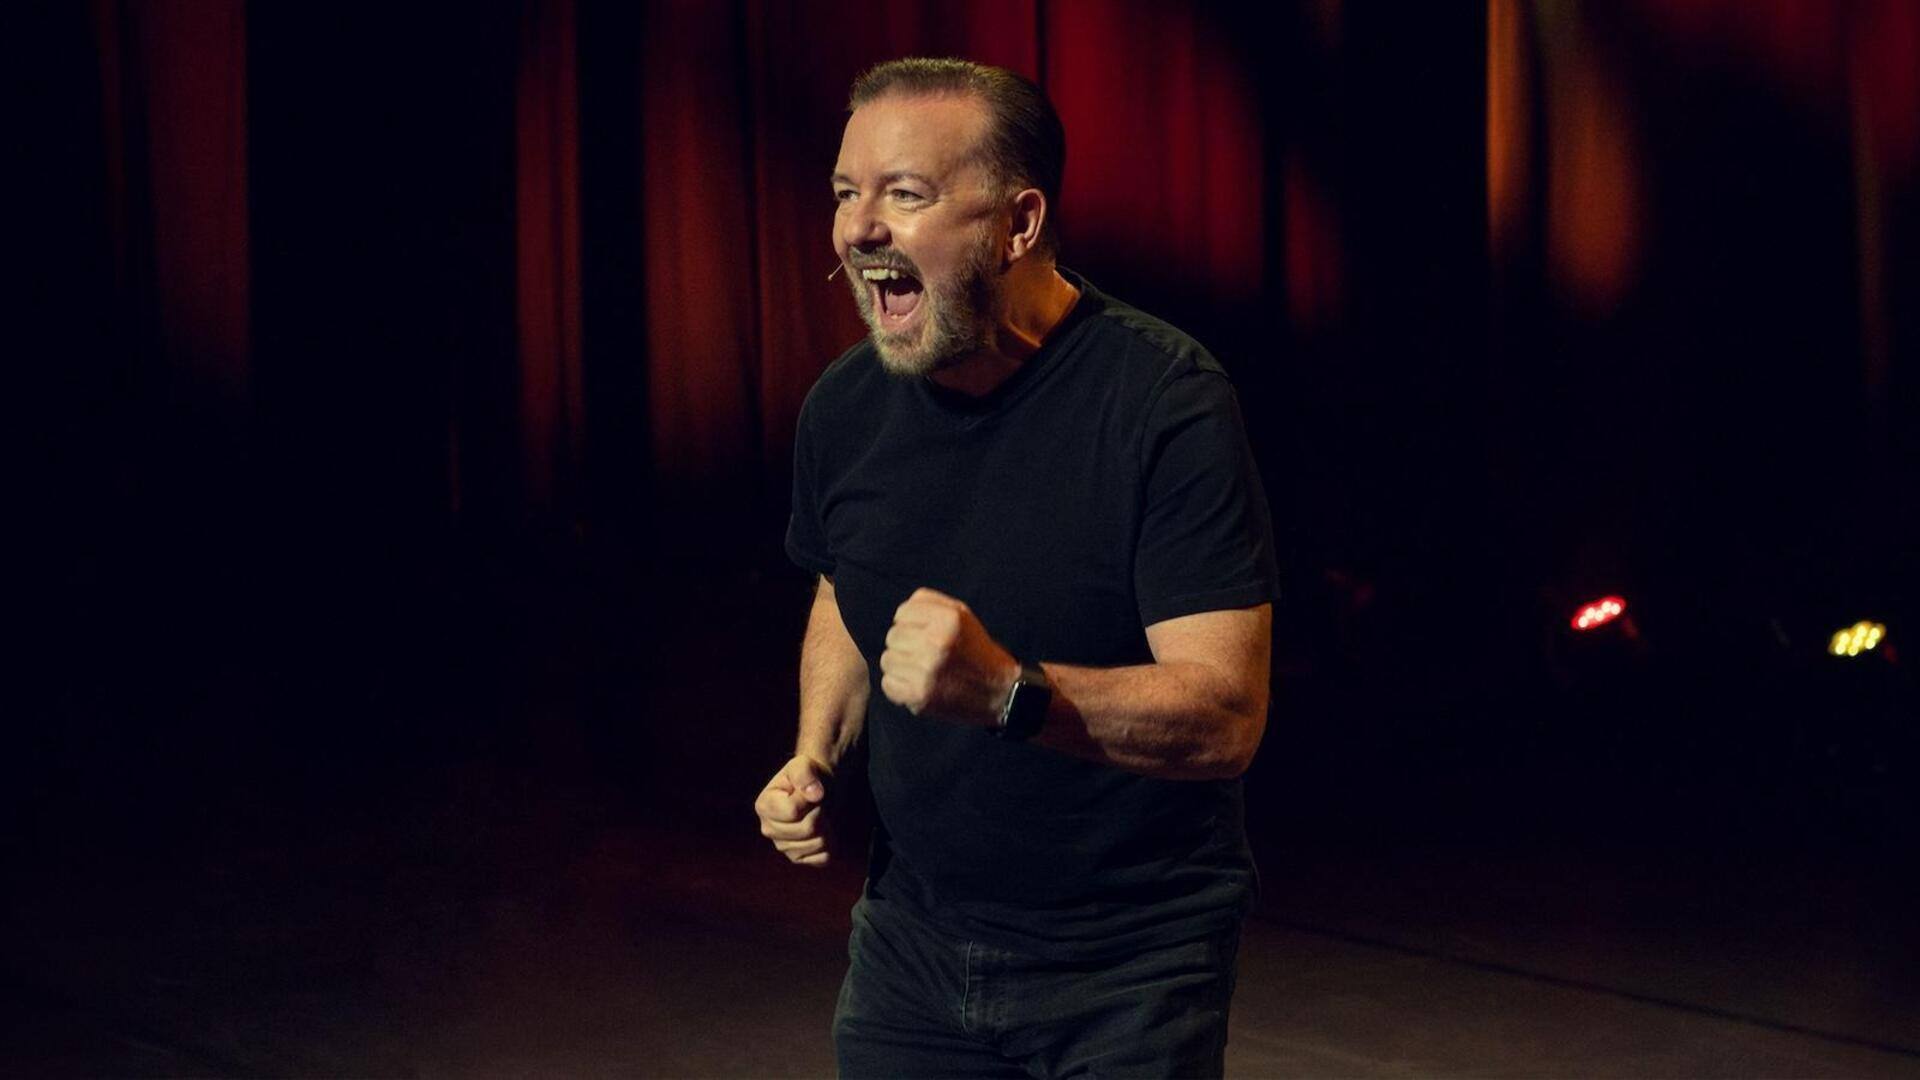 OTT: 'Ricky Gervais: Armageddon' is streaming now